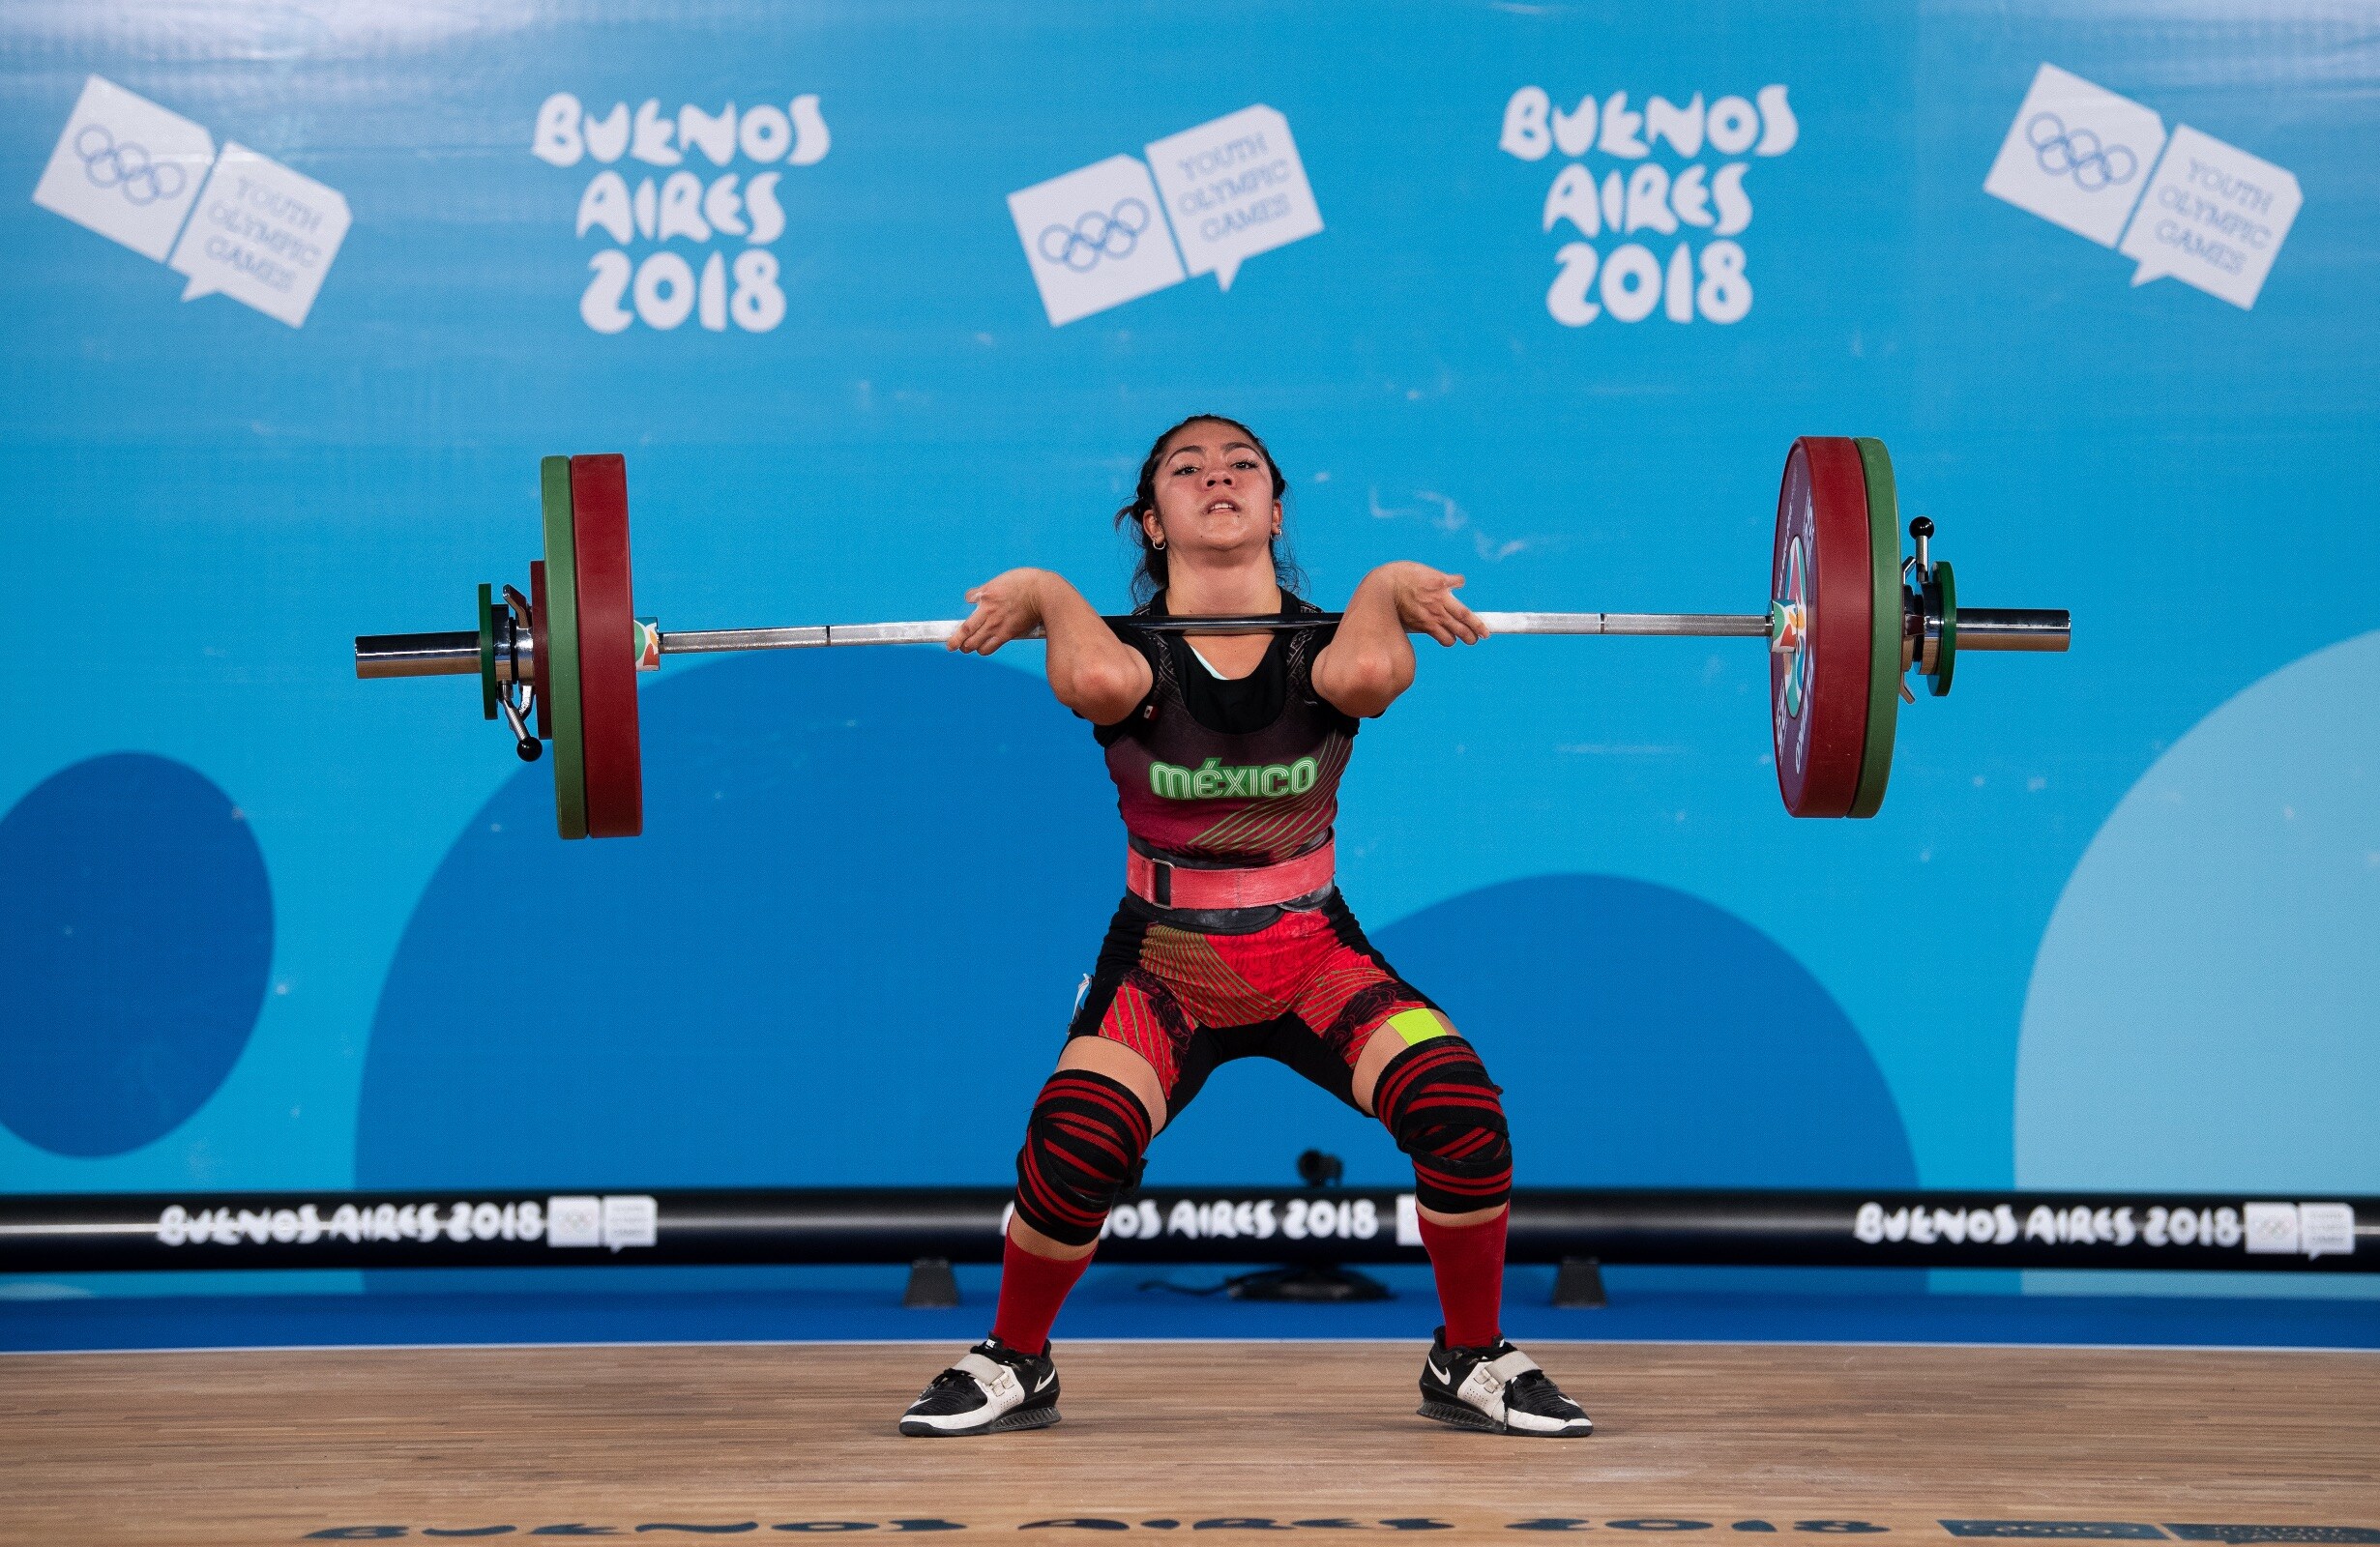 Buenos Aires 2018 - Weightlifting - Women’s 48kg